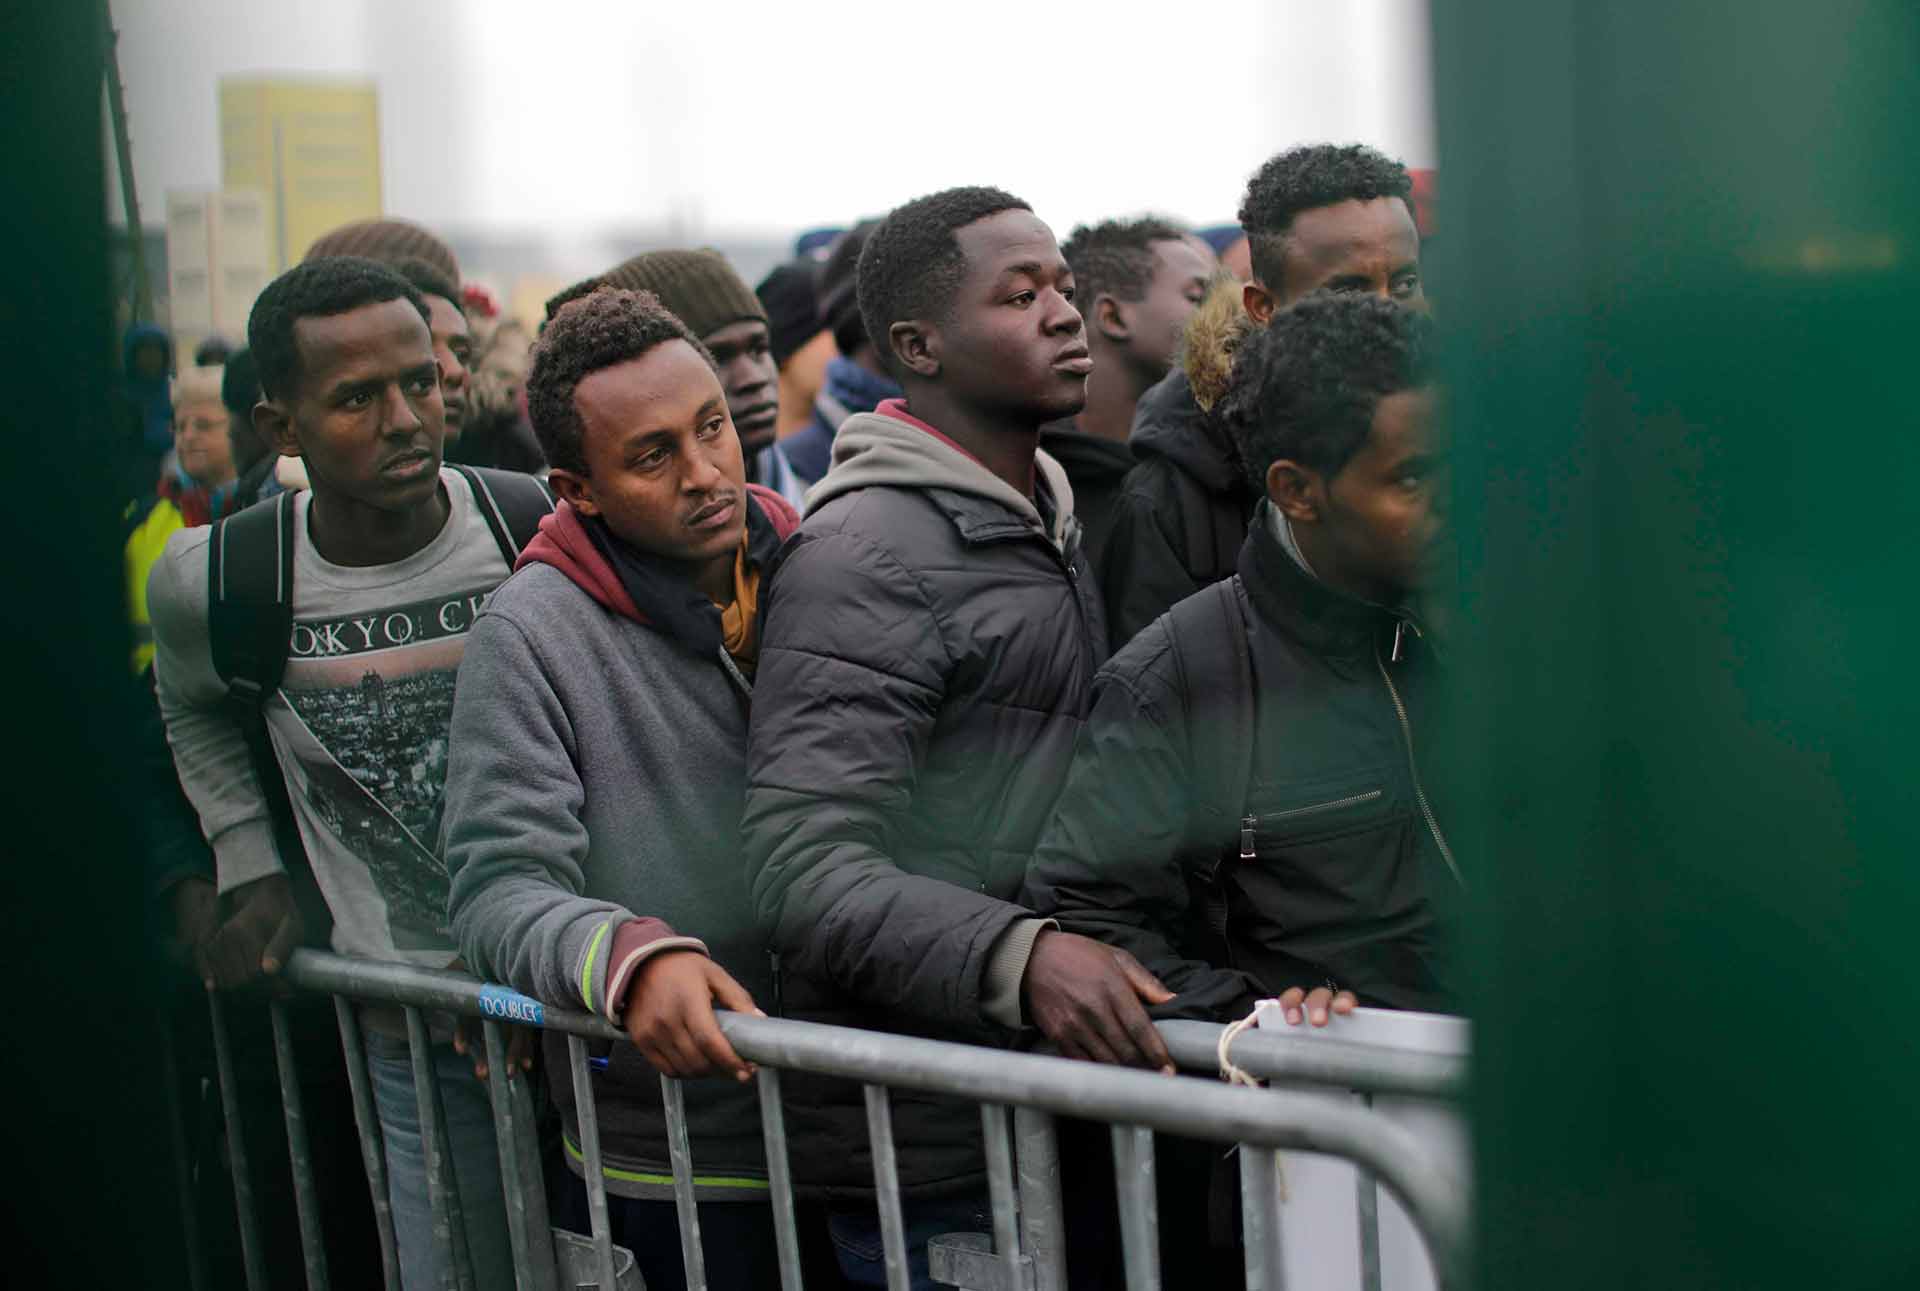 Migrants line-up to register at a processing centre in the makeshift migrant camp known as "the jungle" near Calais, northern France, Monday Oct. 24, 2016. (AP Photo/Emilio Morenatti)